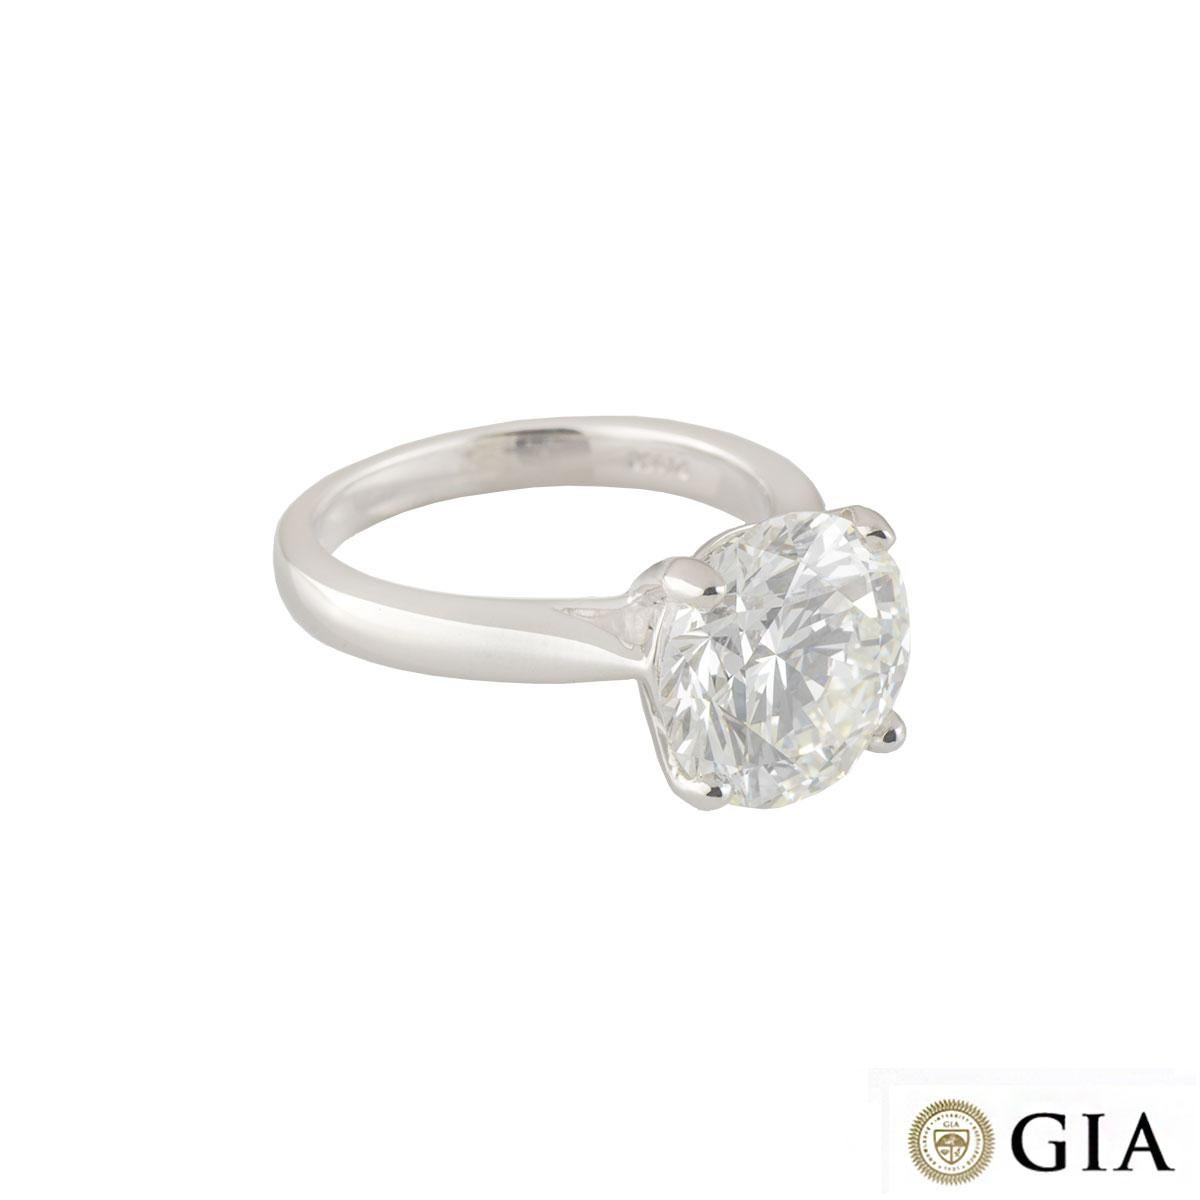 GIA Certified Round Brilliant Diamond Solitaire Engagement Ring 5.01 ct J/VVS2 For Sale 2